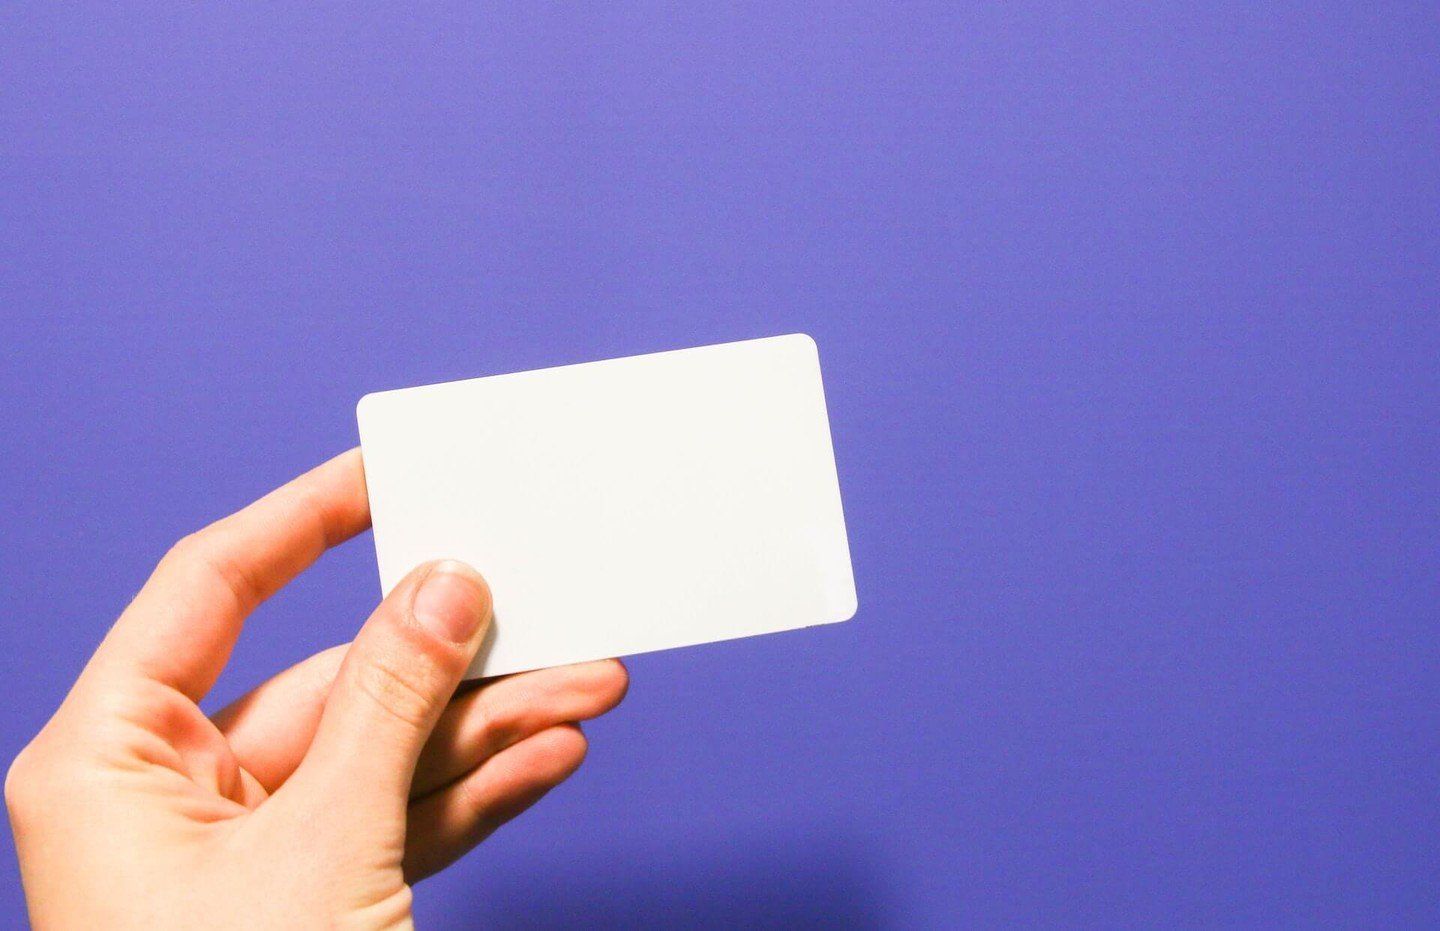 Someone holding a blank credit card